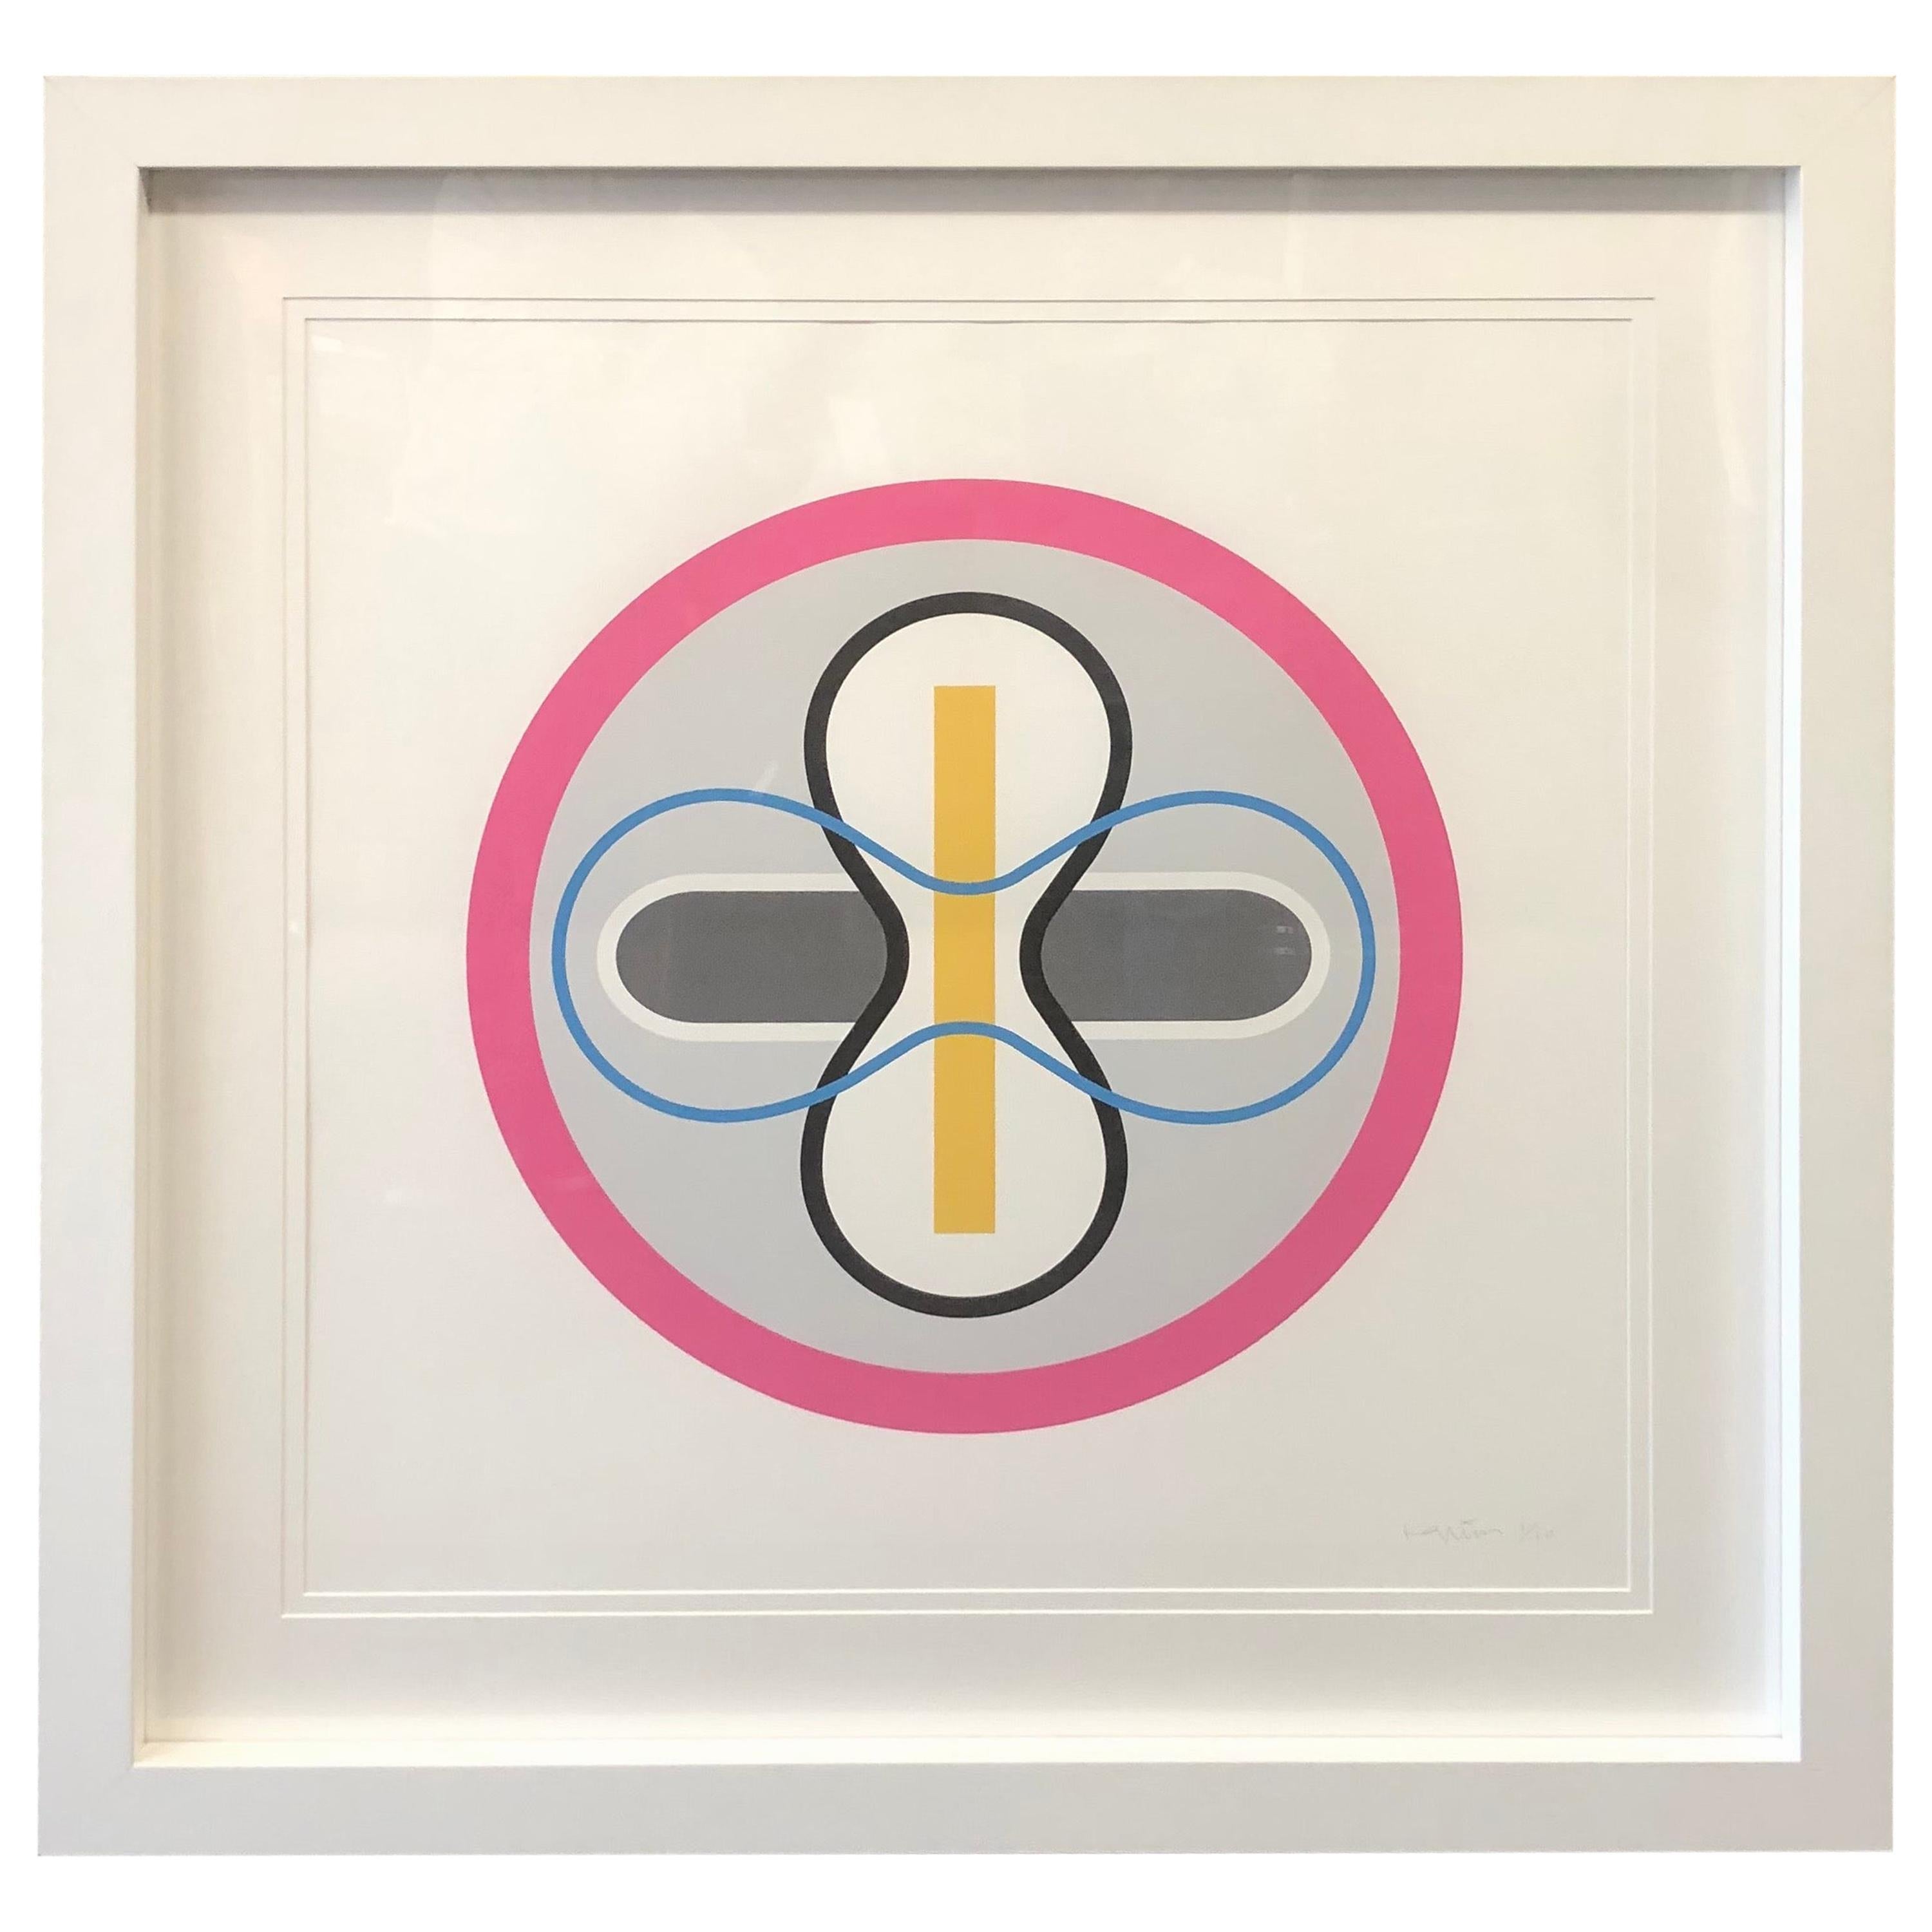 Large Colorful Geometric Lithograph Signed and Numbered by Karim Rashid For Sale